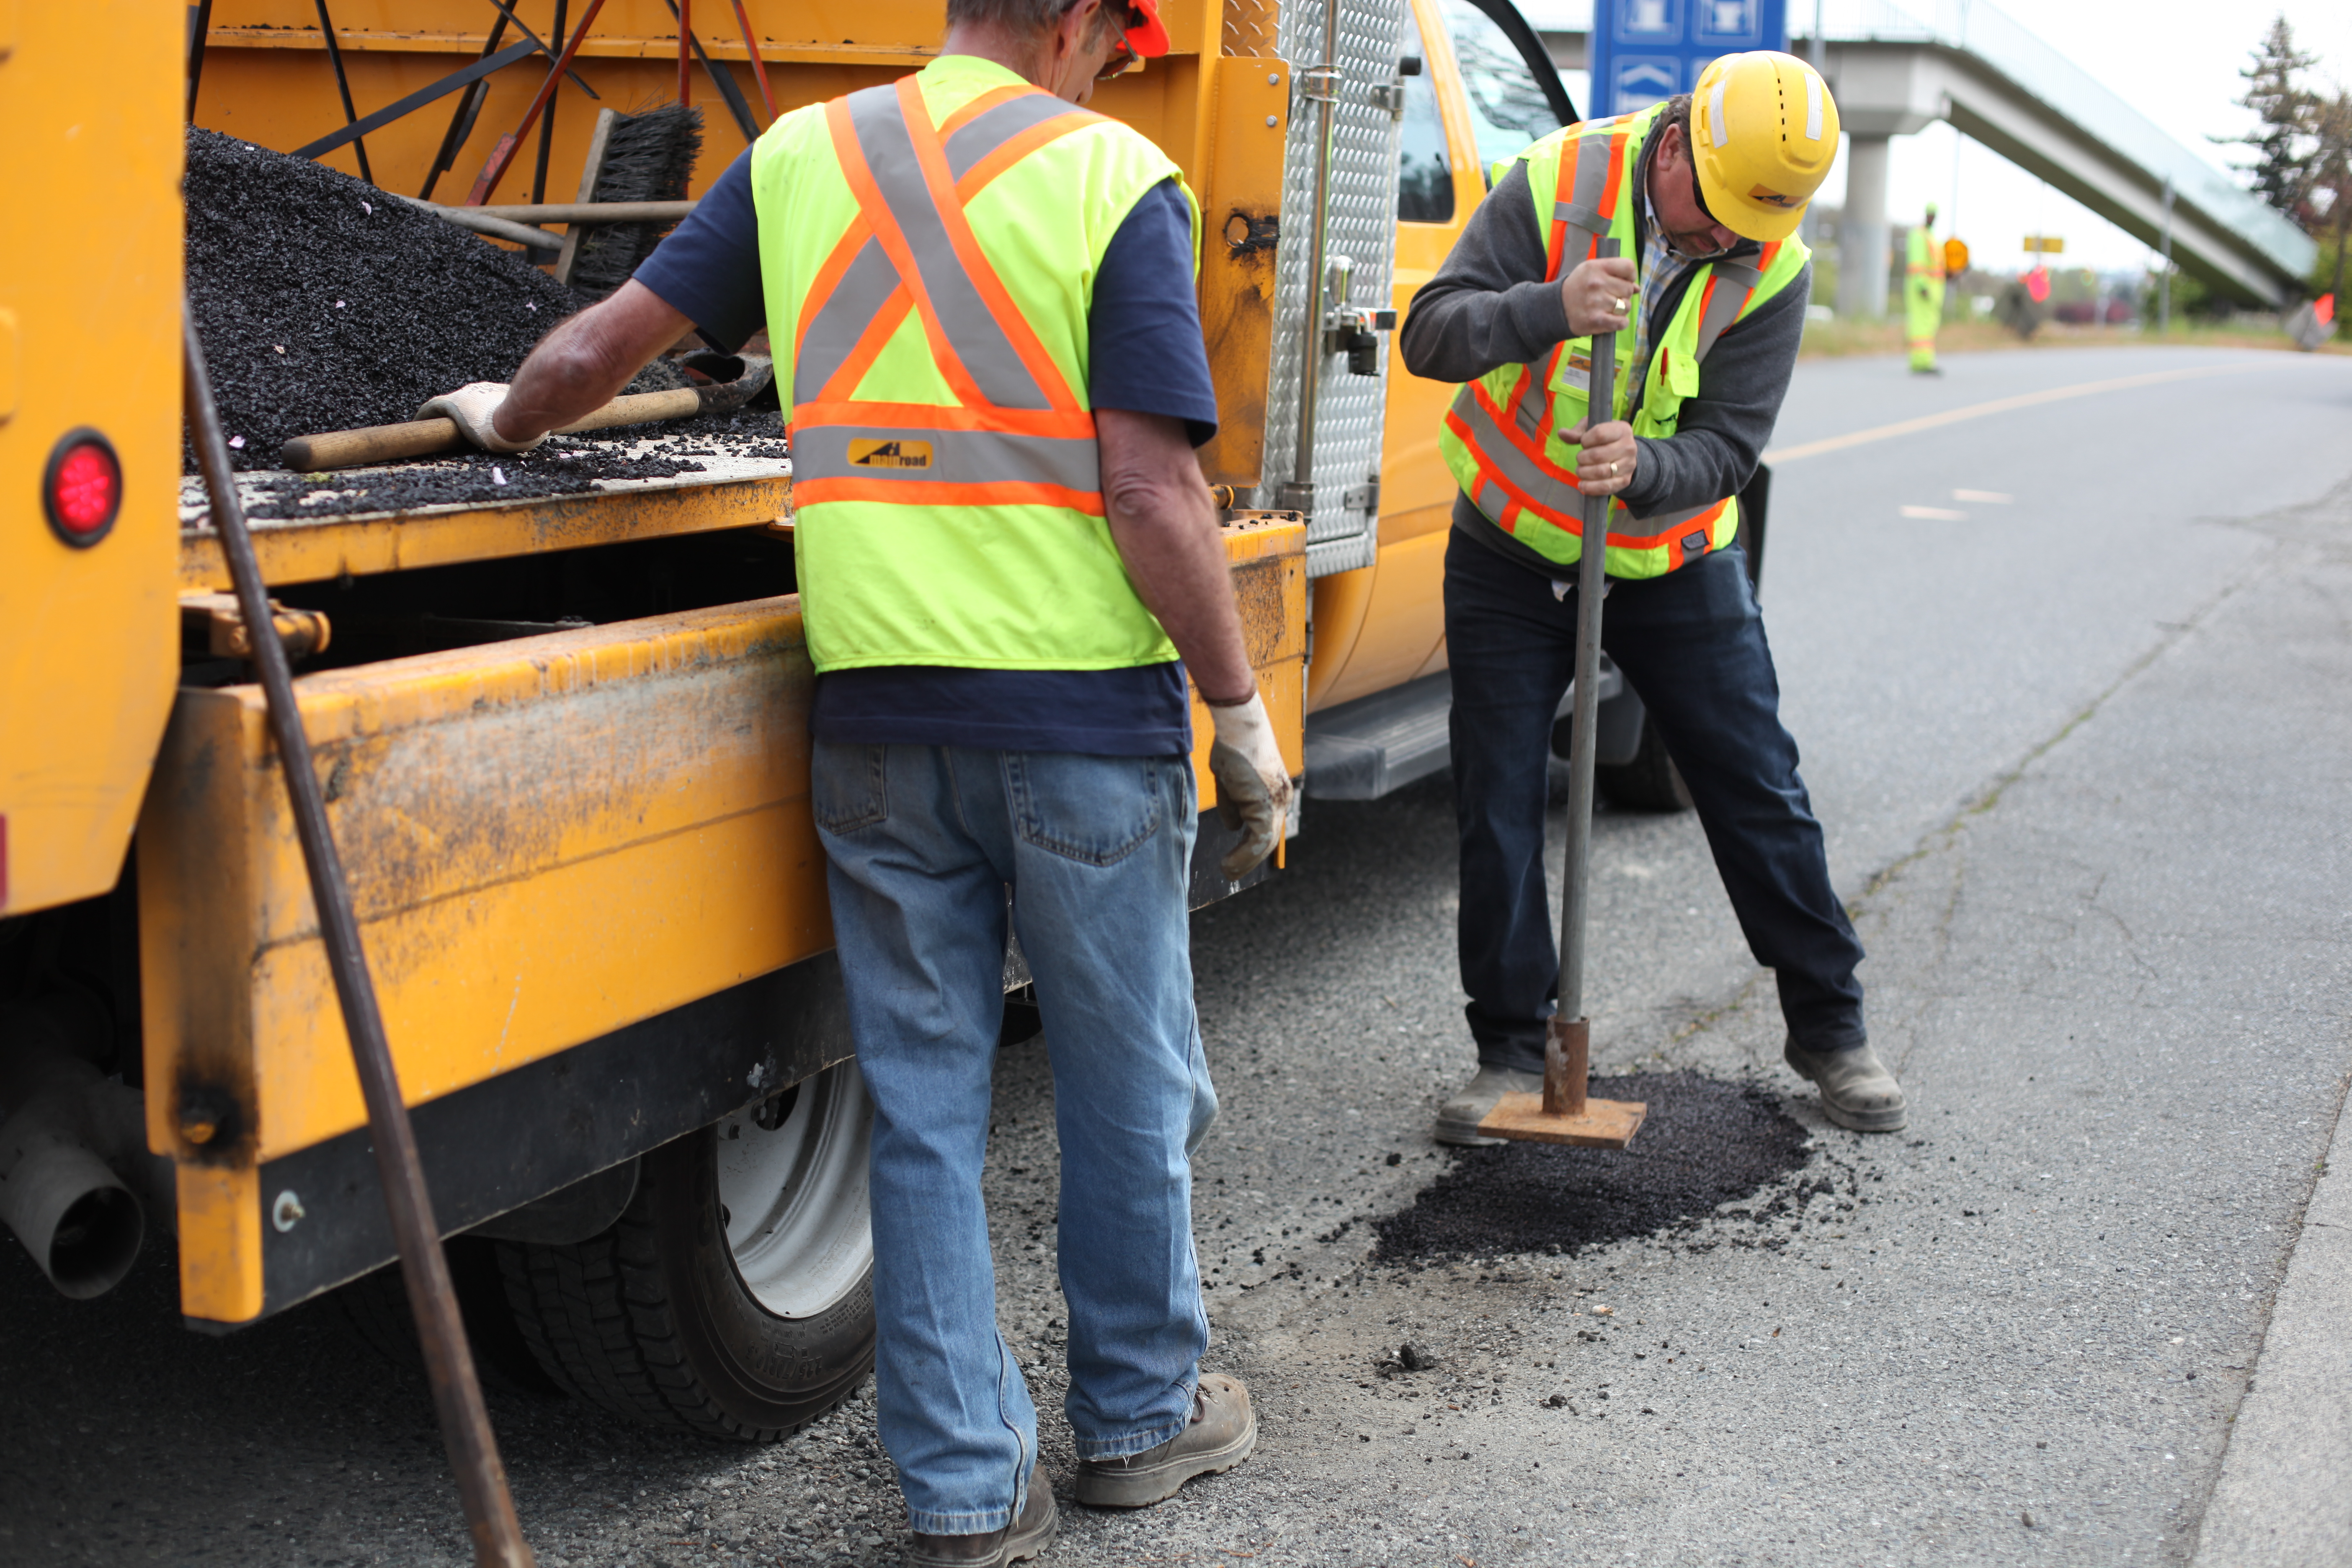 There’s a permanent fix for potholes.